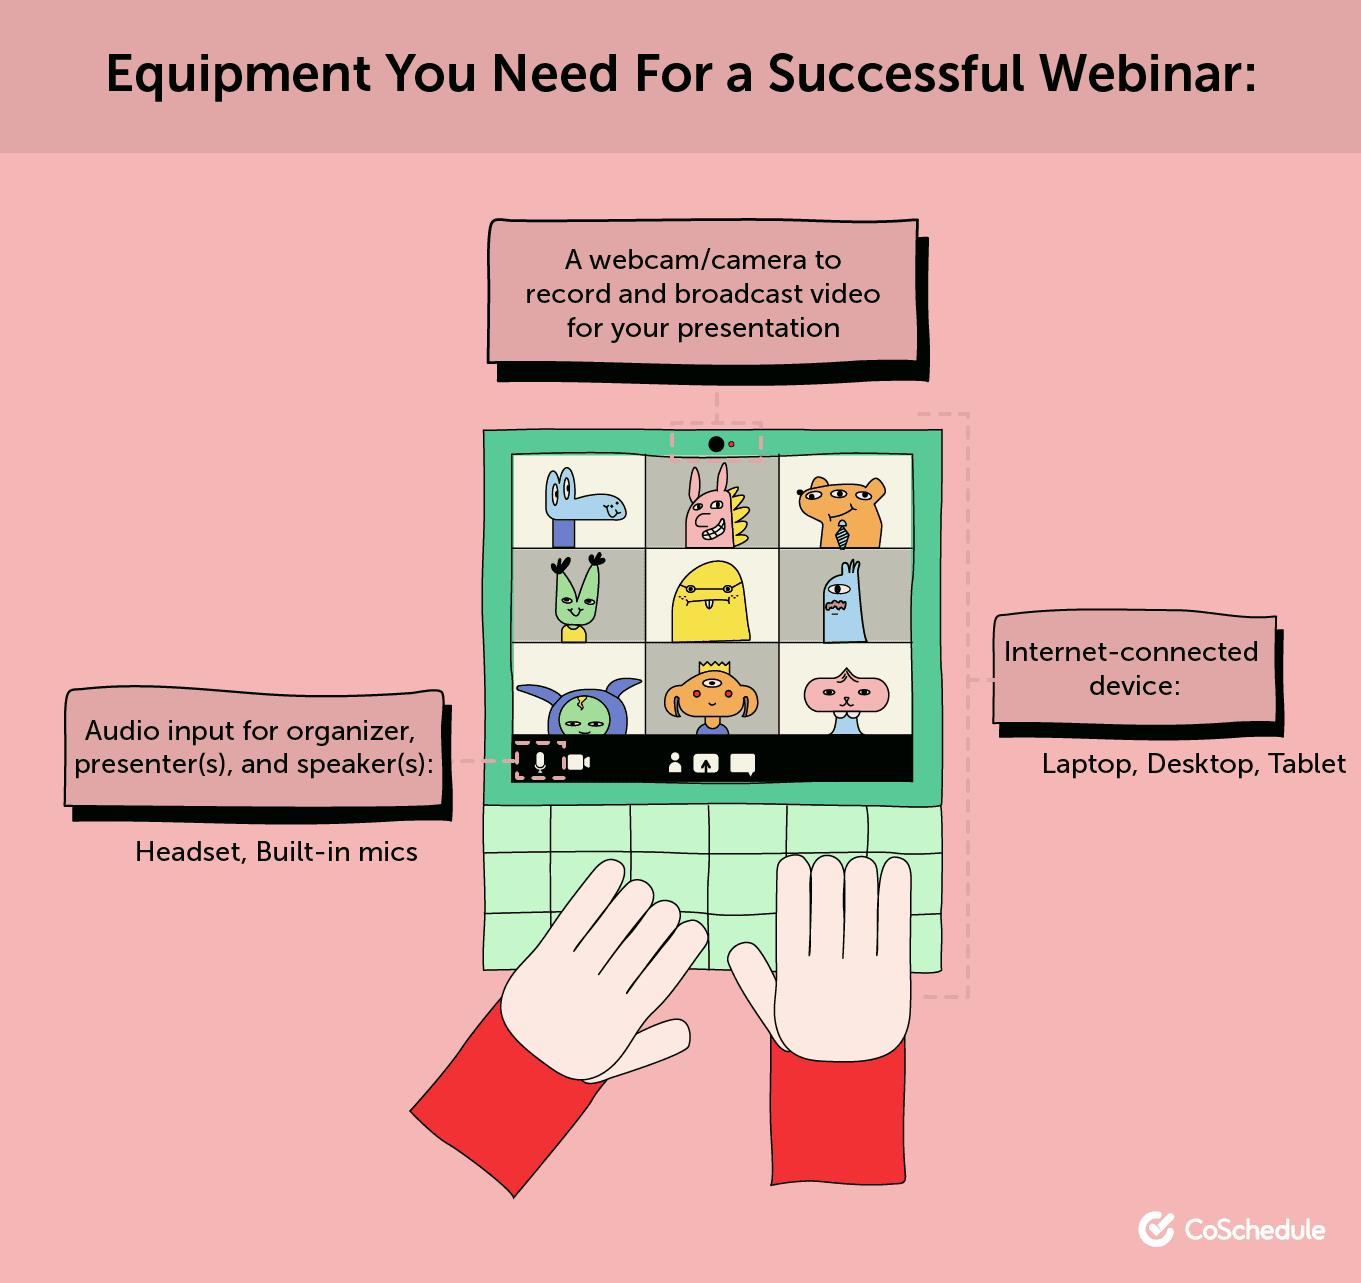 Equipment you need for a successful webinar